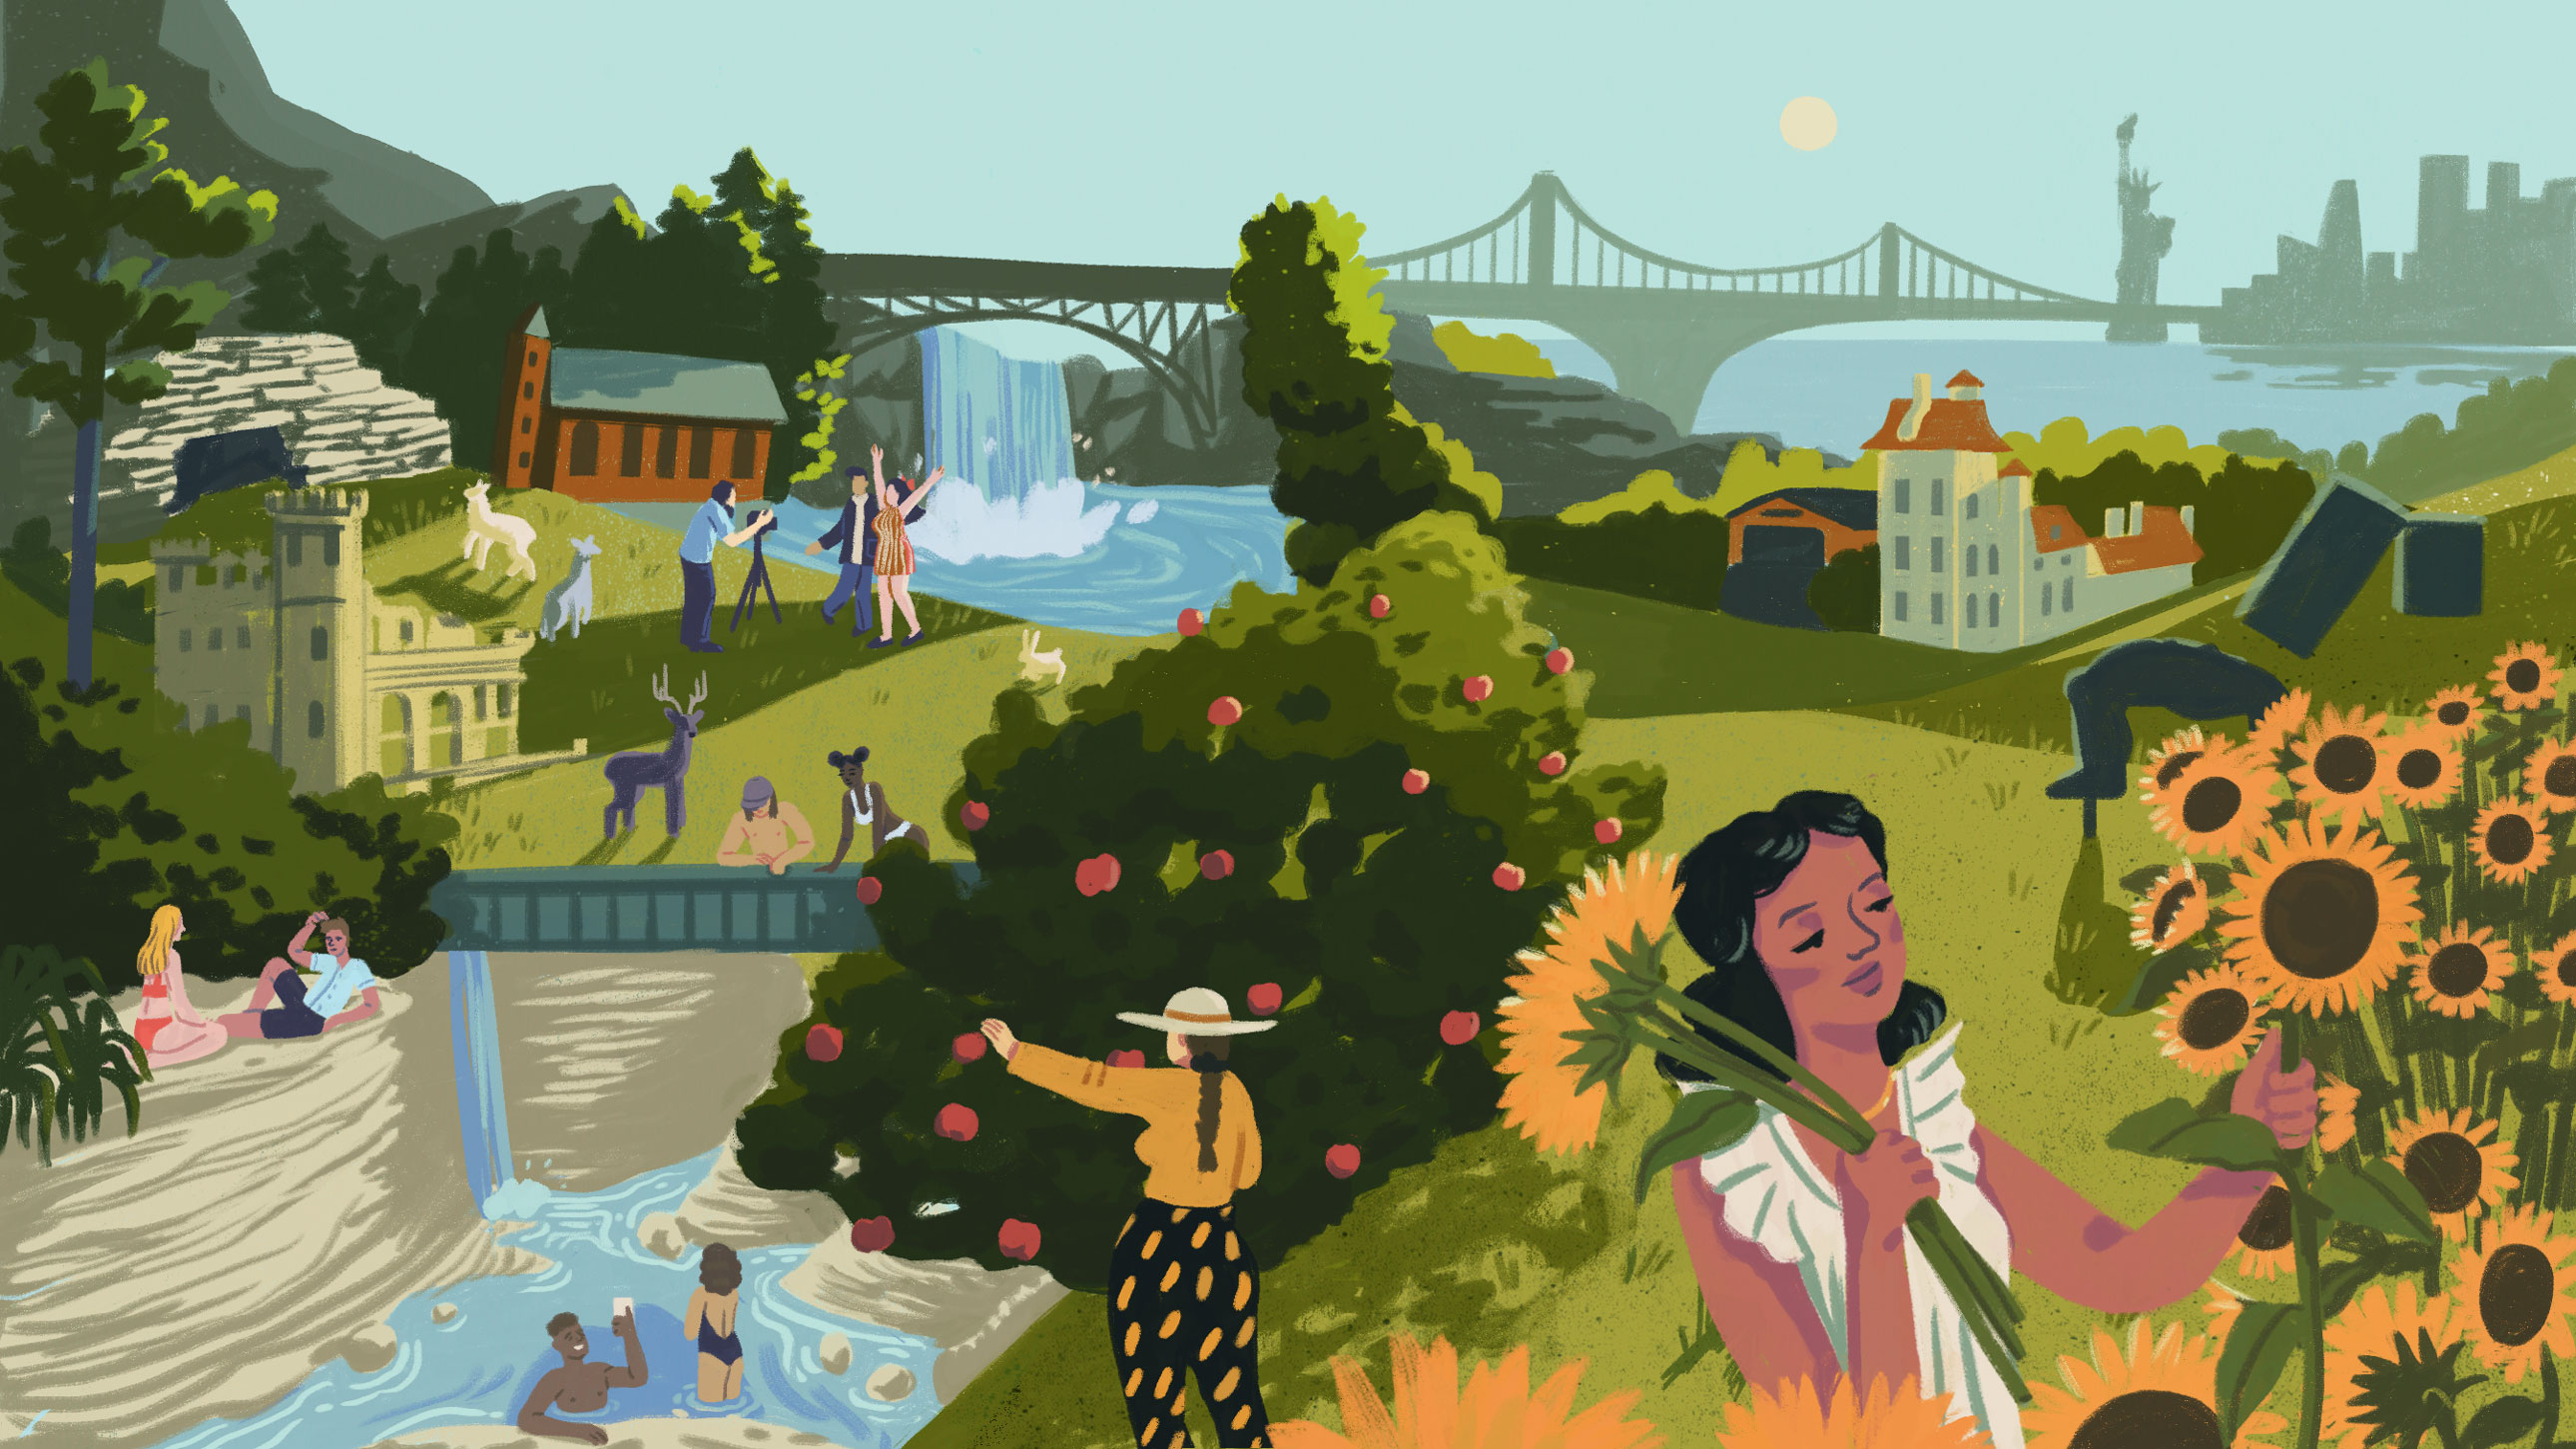 An illustration showing people enjoying apple picking, swimming, waterfalls, and animals, with the New York skyline in the distance.